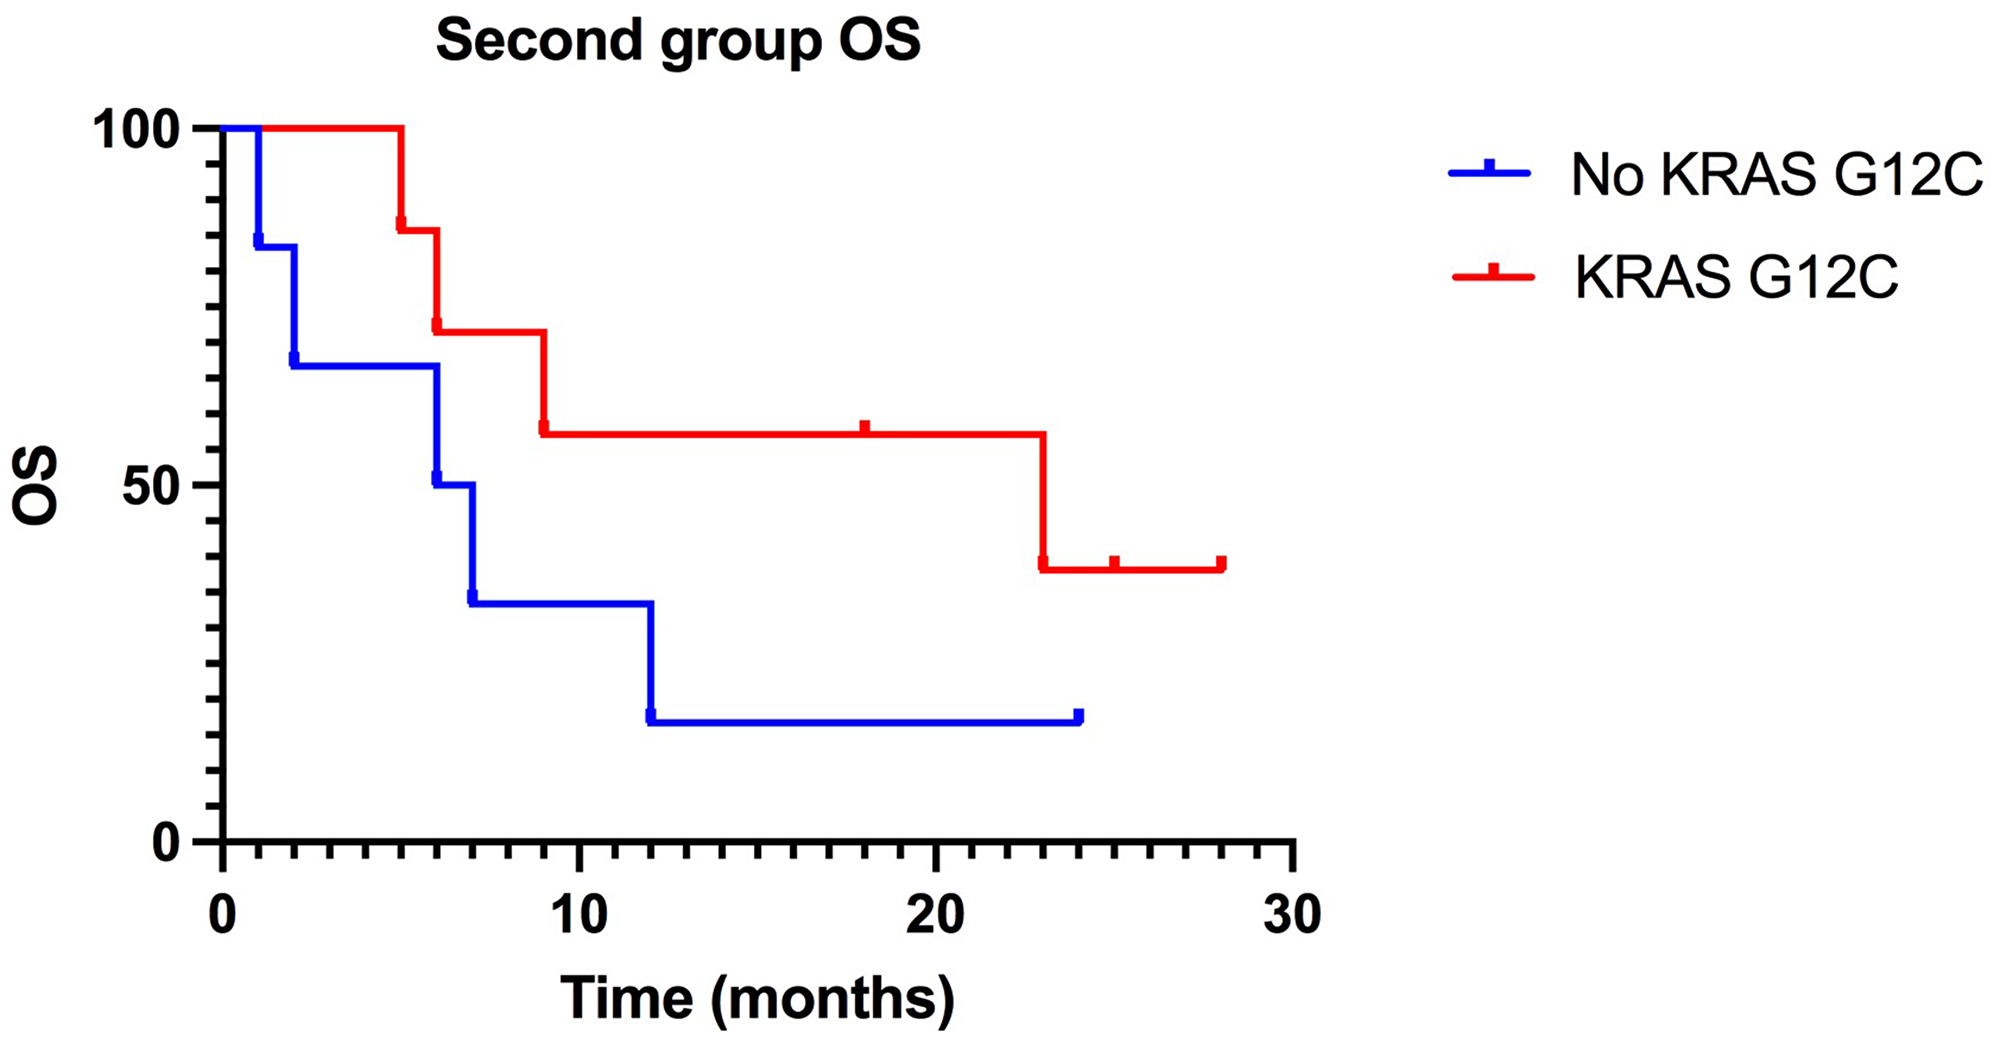 Kaplan-Meier of OS in the second group, treated with ICIs in second-line: difference between KRAS-G12C mutated patients 2019; OS (23 months) and NO KRAS G12C mutated patients 2019; OS (6, 5 months) is statistically significant.